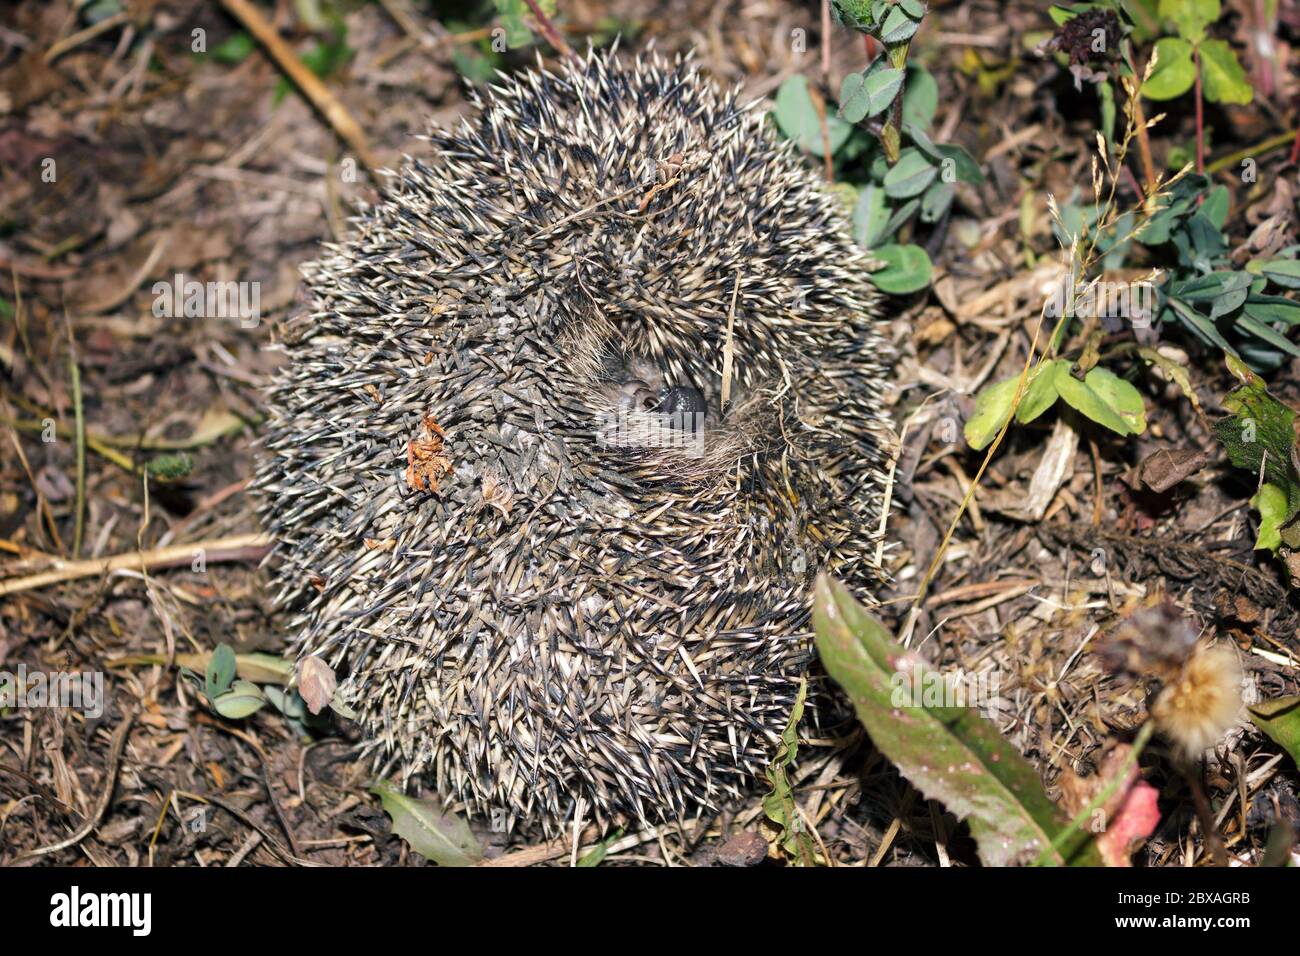 wild hedgehog curled into ball in grass at night Stock Photo